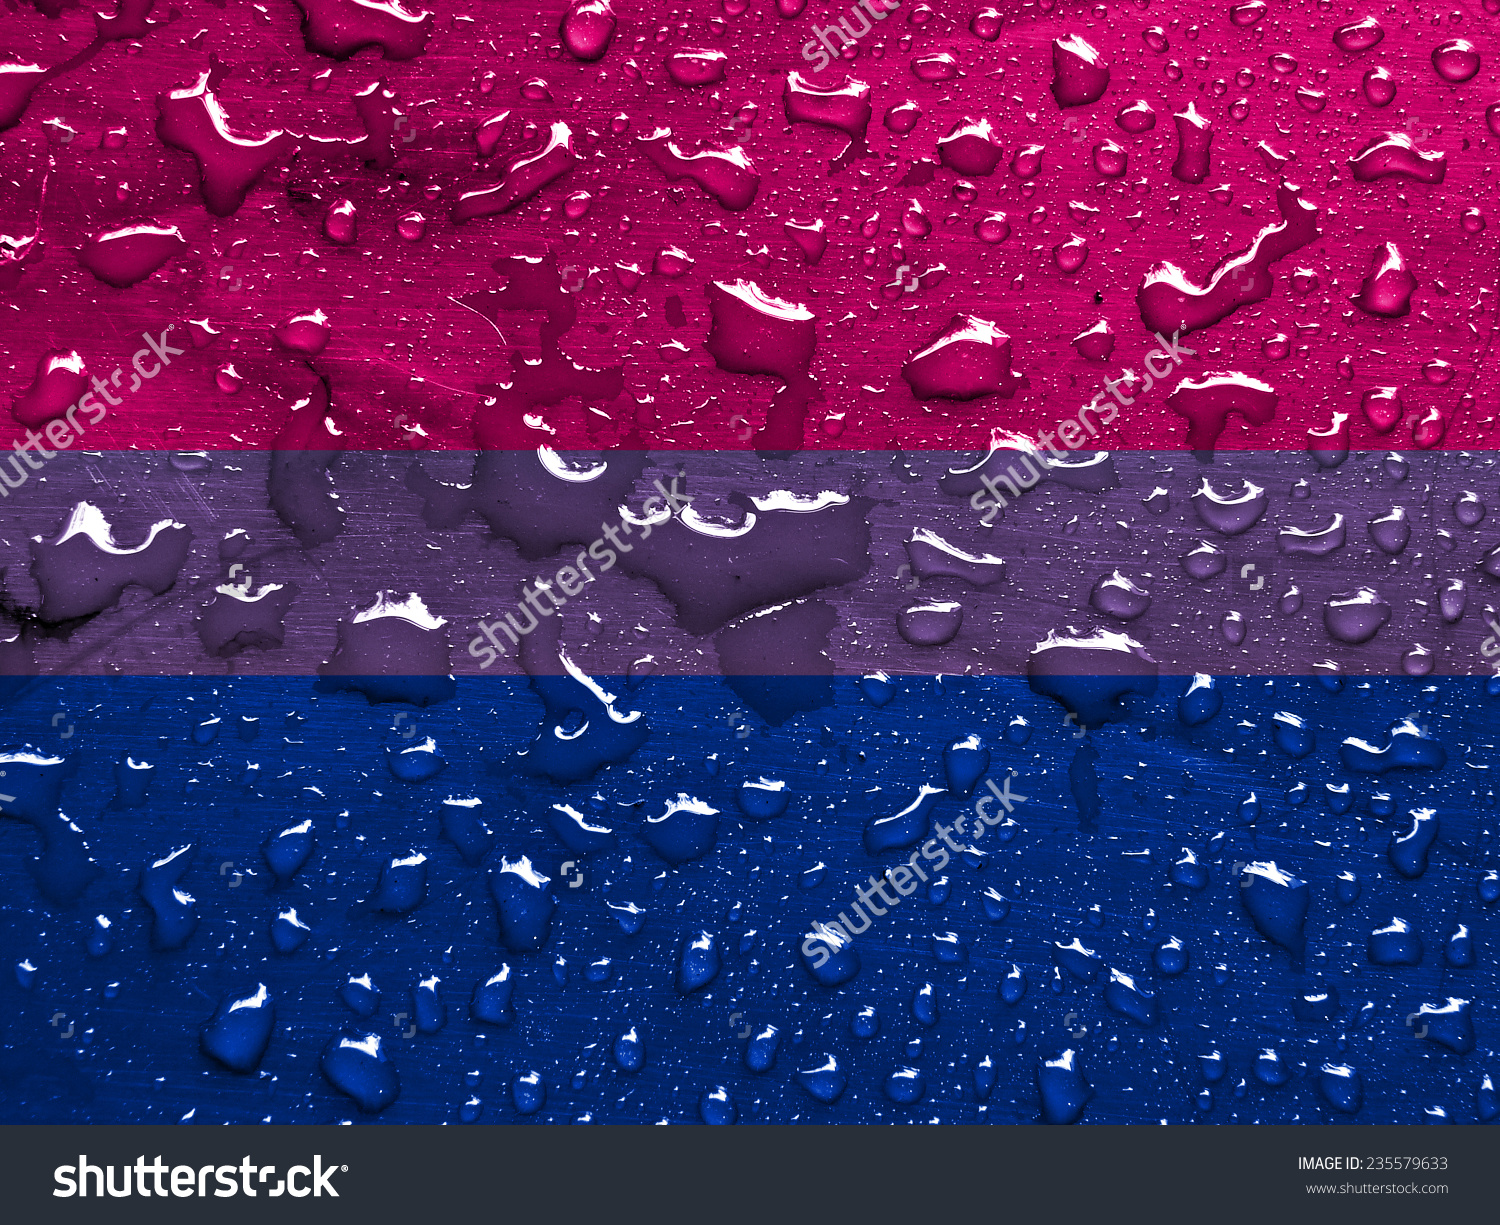 Amazing Bisexual Pride Flag Pictures & Backgrounds